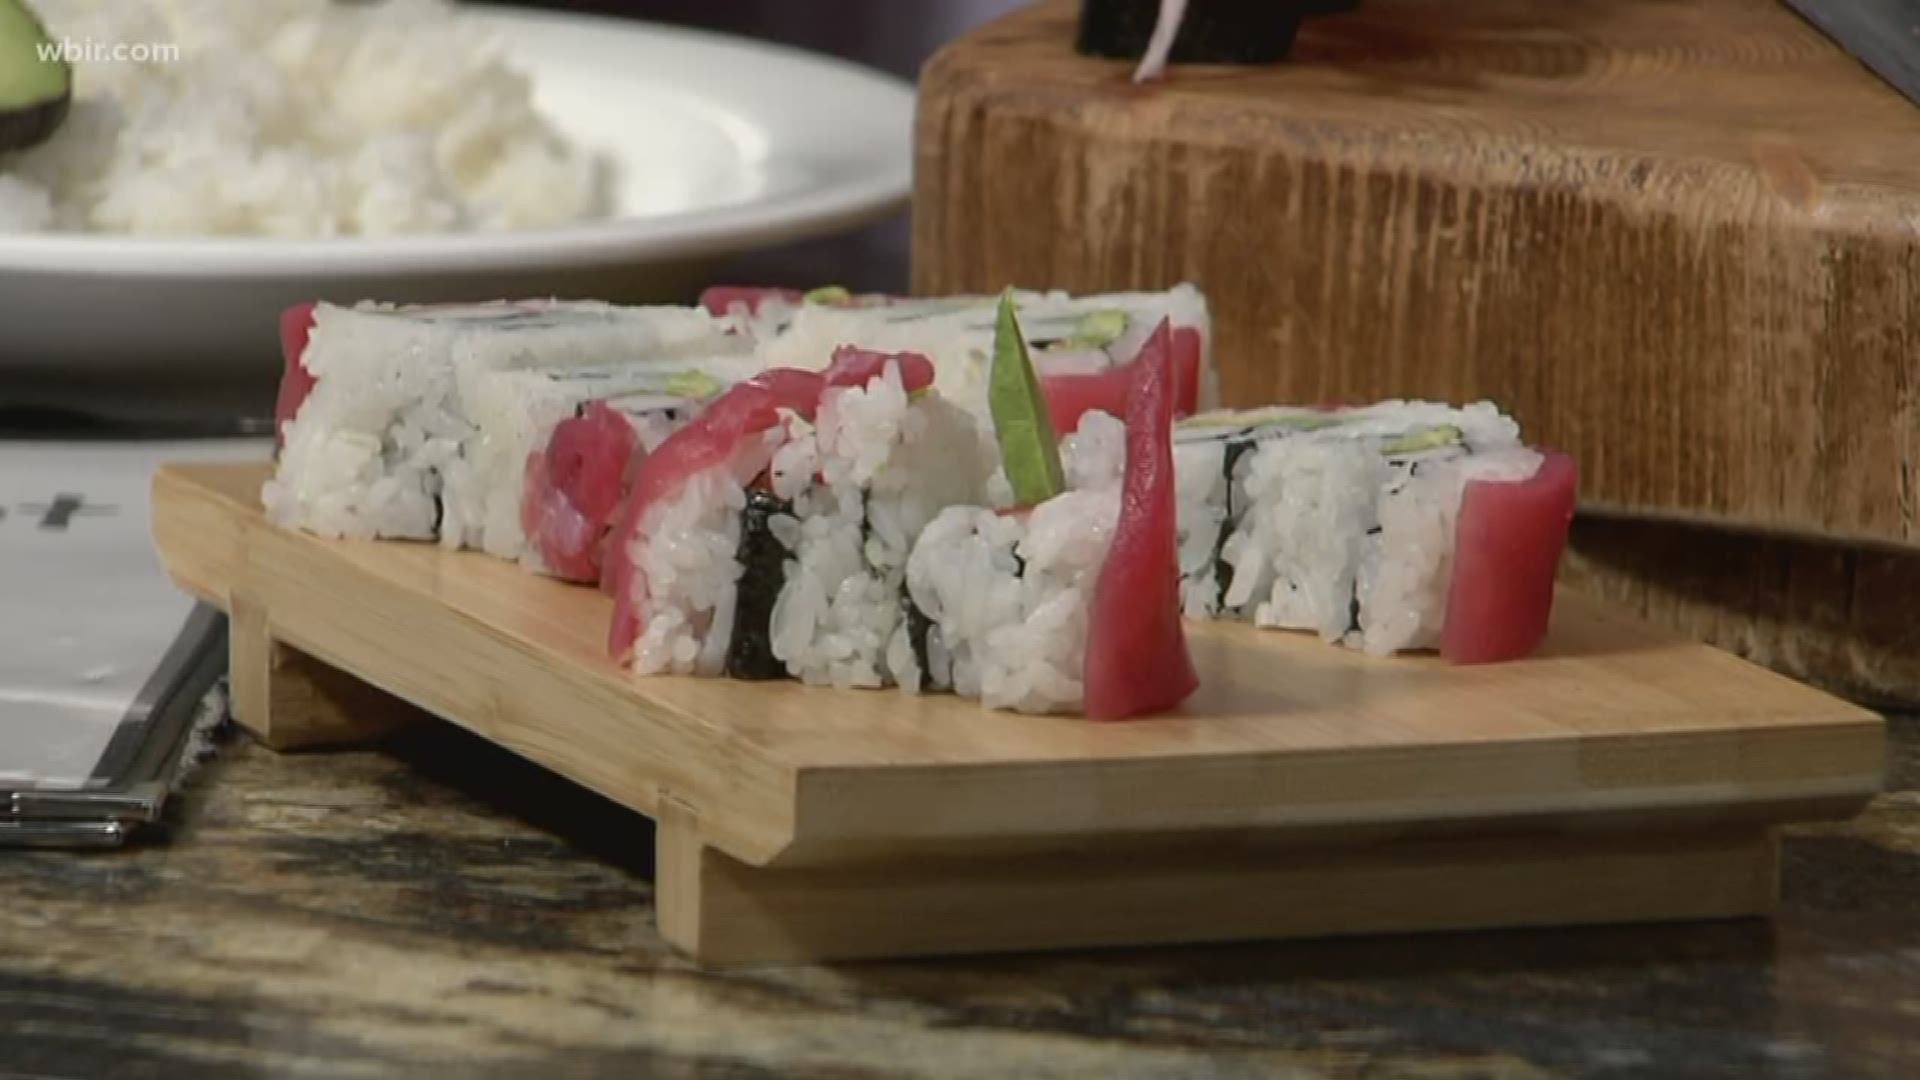 Sushi Spot is with us in the kitchen to show us how to make Valentine's Day sushi!